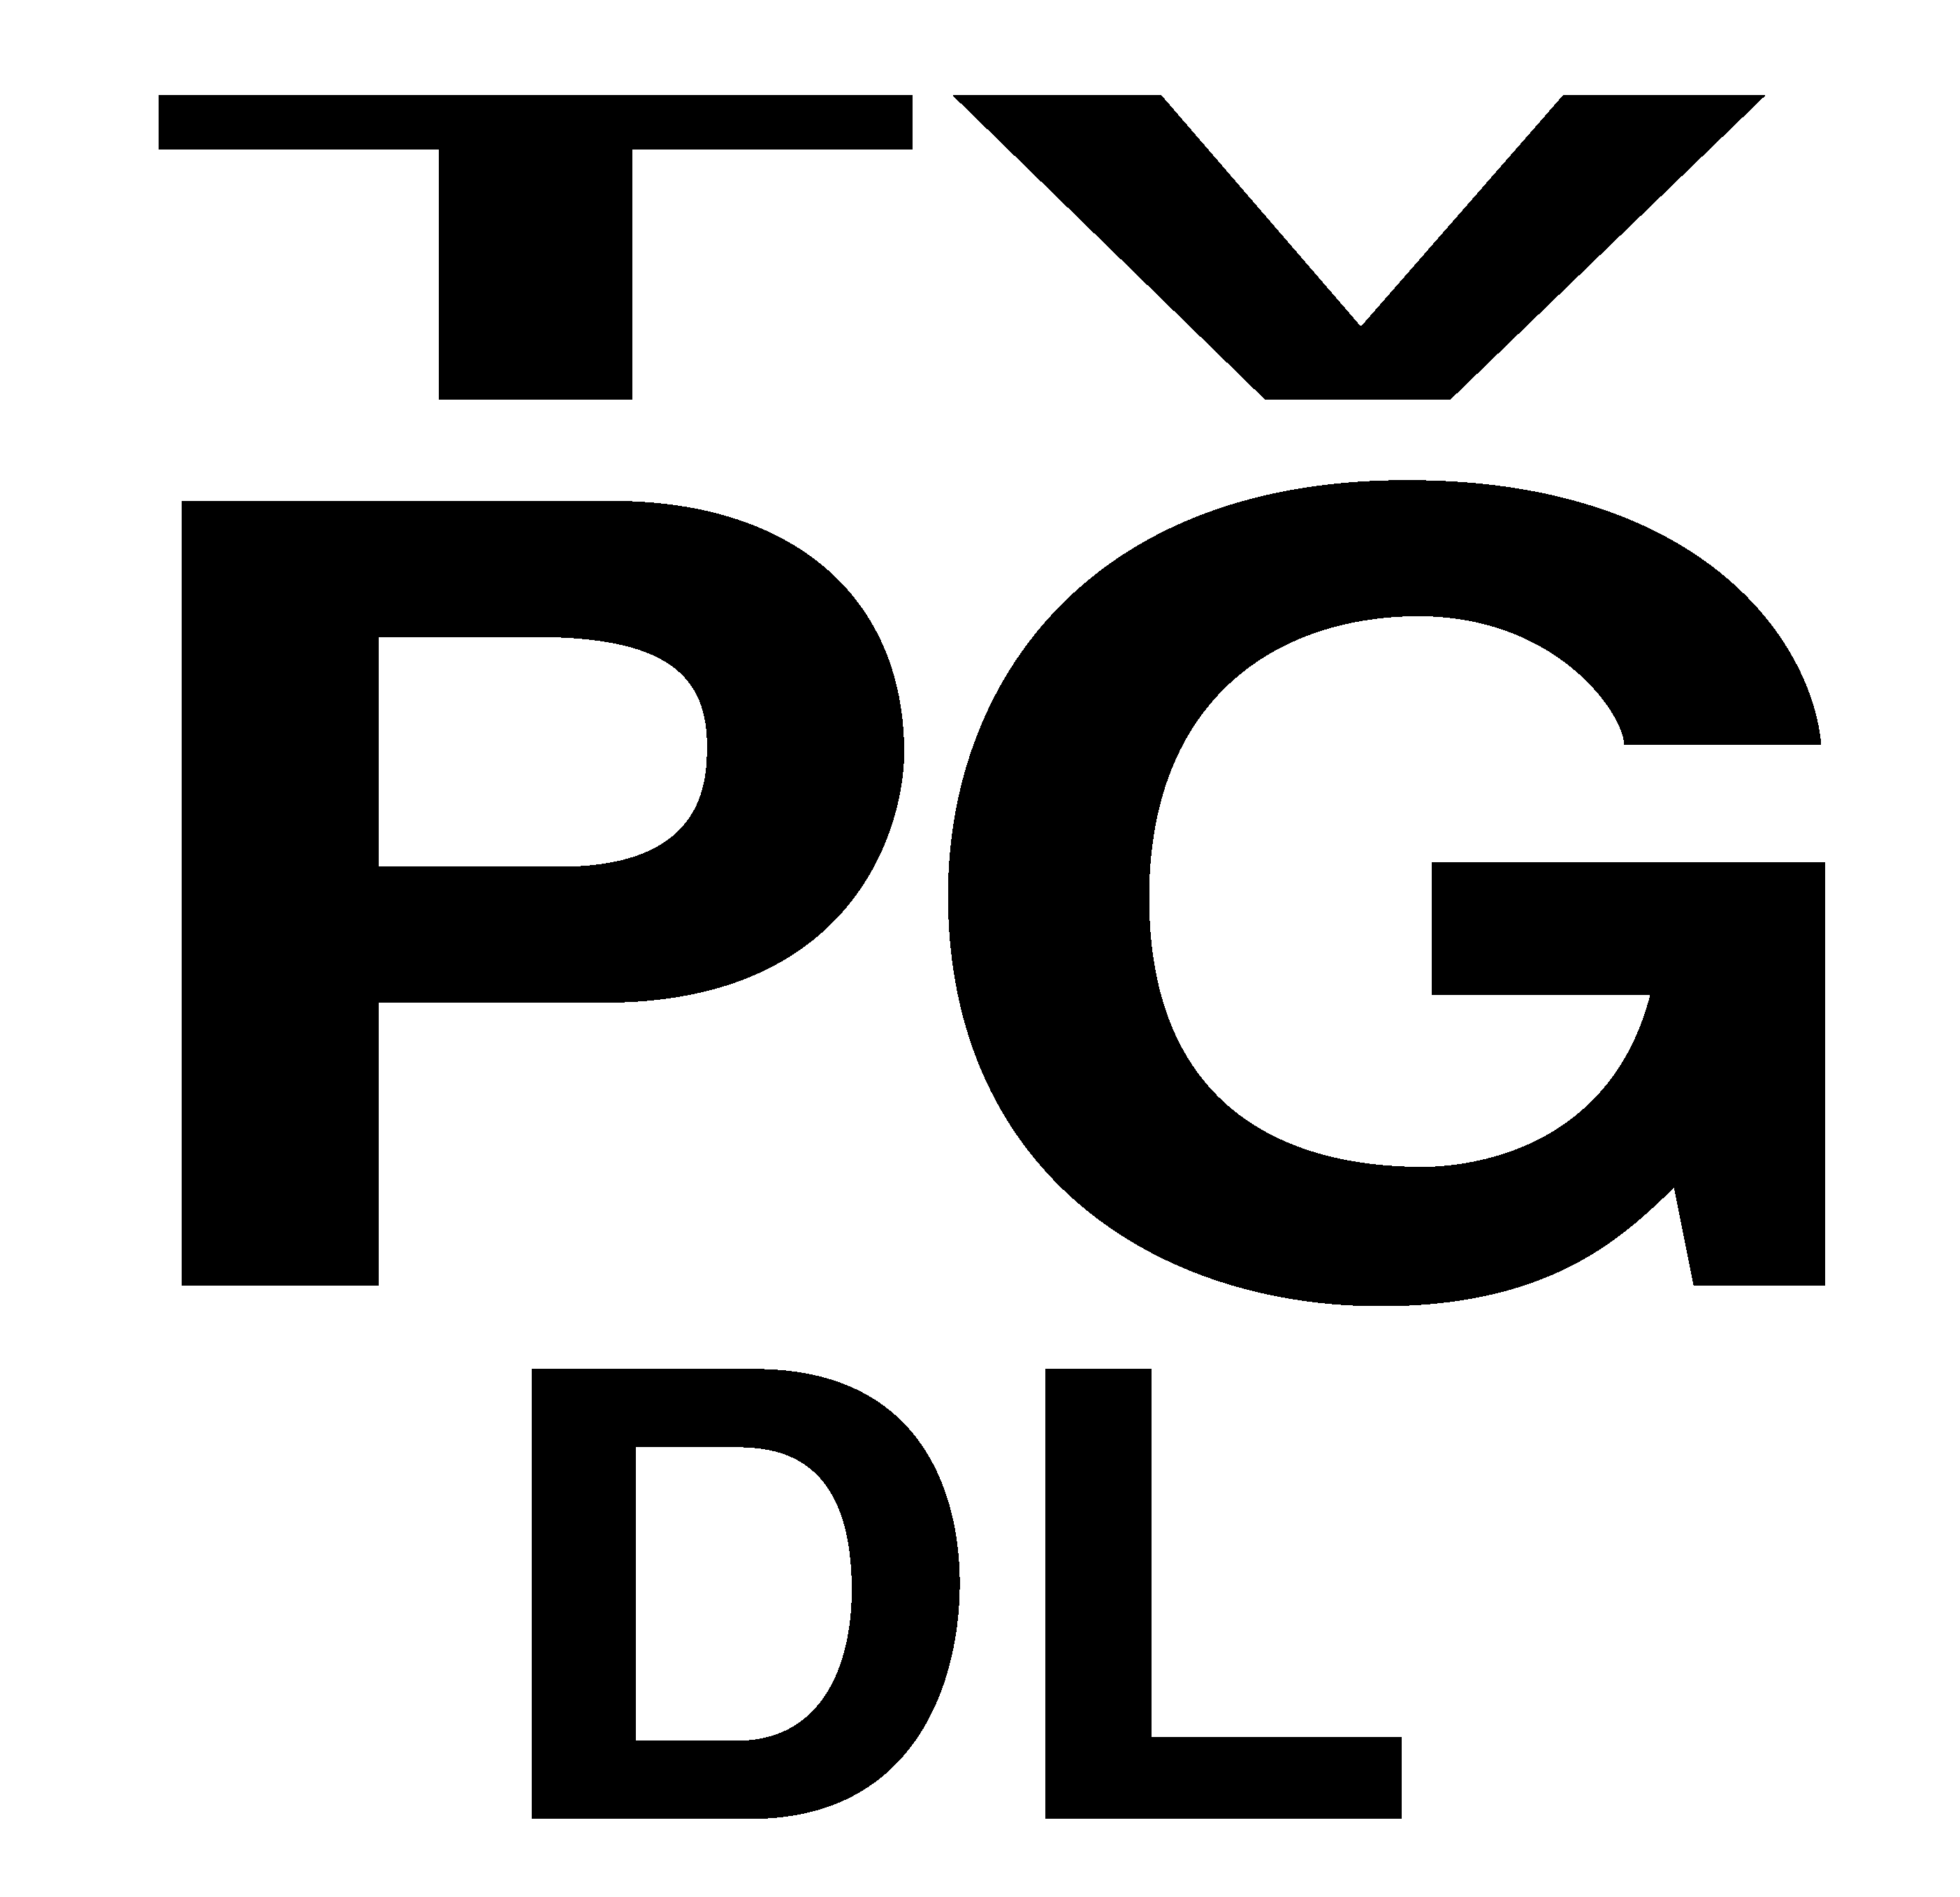 TV-Y7 CC Logo - File:White TV-PG-DL icon.png - Wikimedia Commons